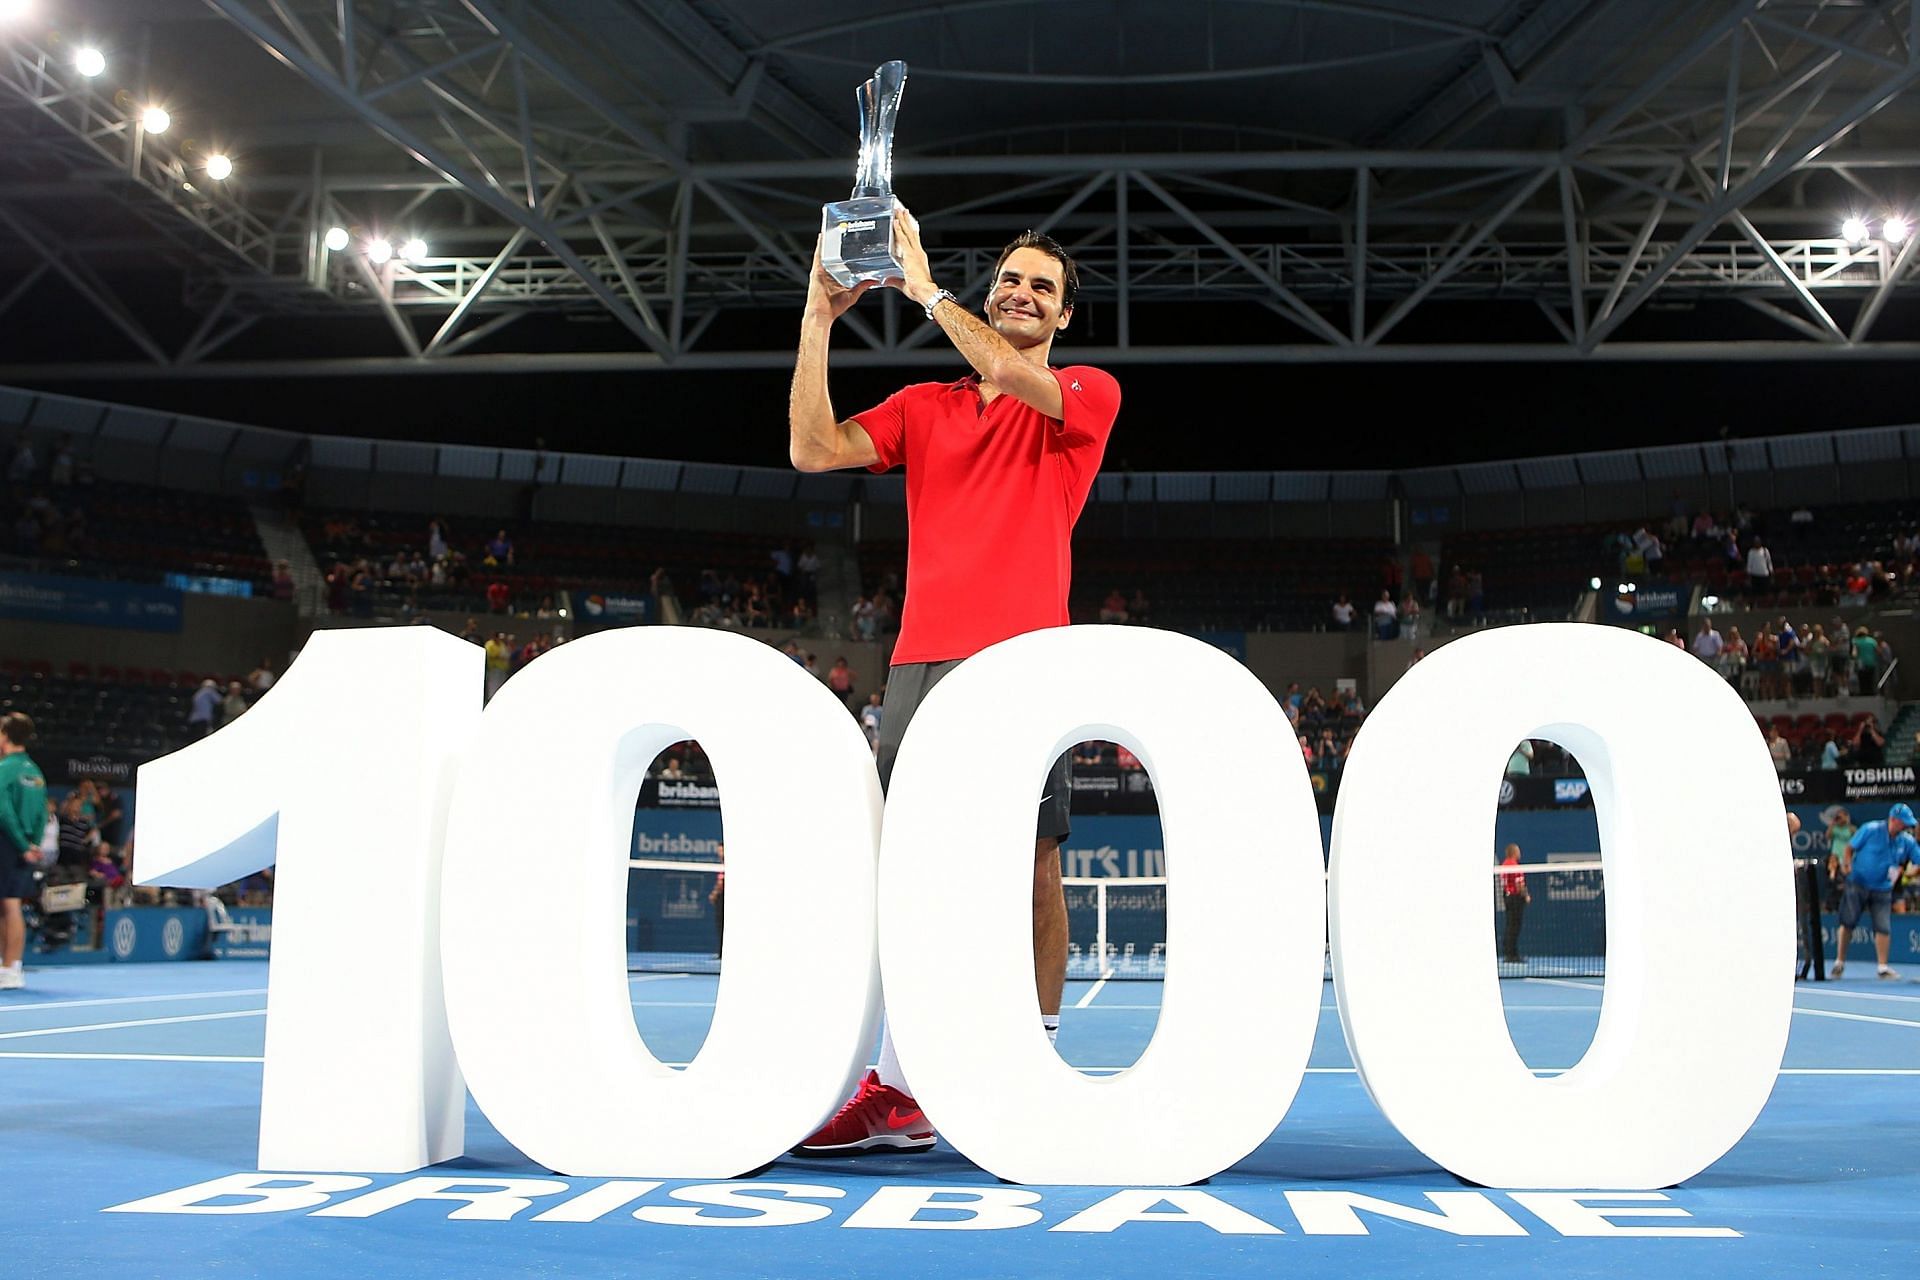 Roger Federer became the third player to reach 1,000 career wins